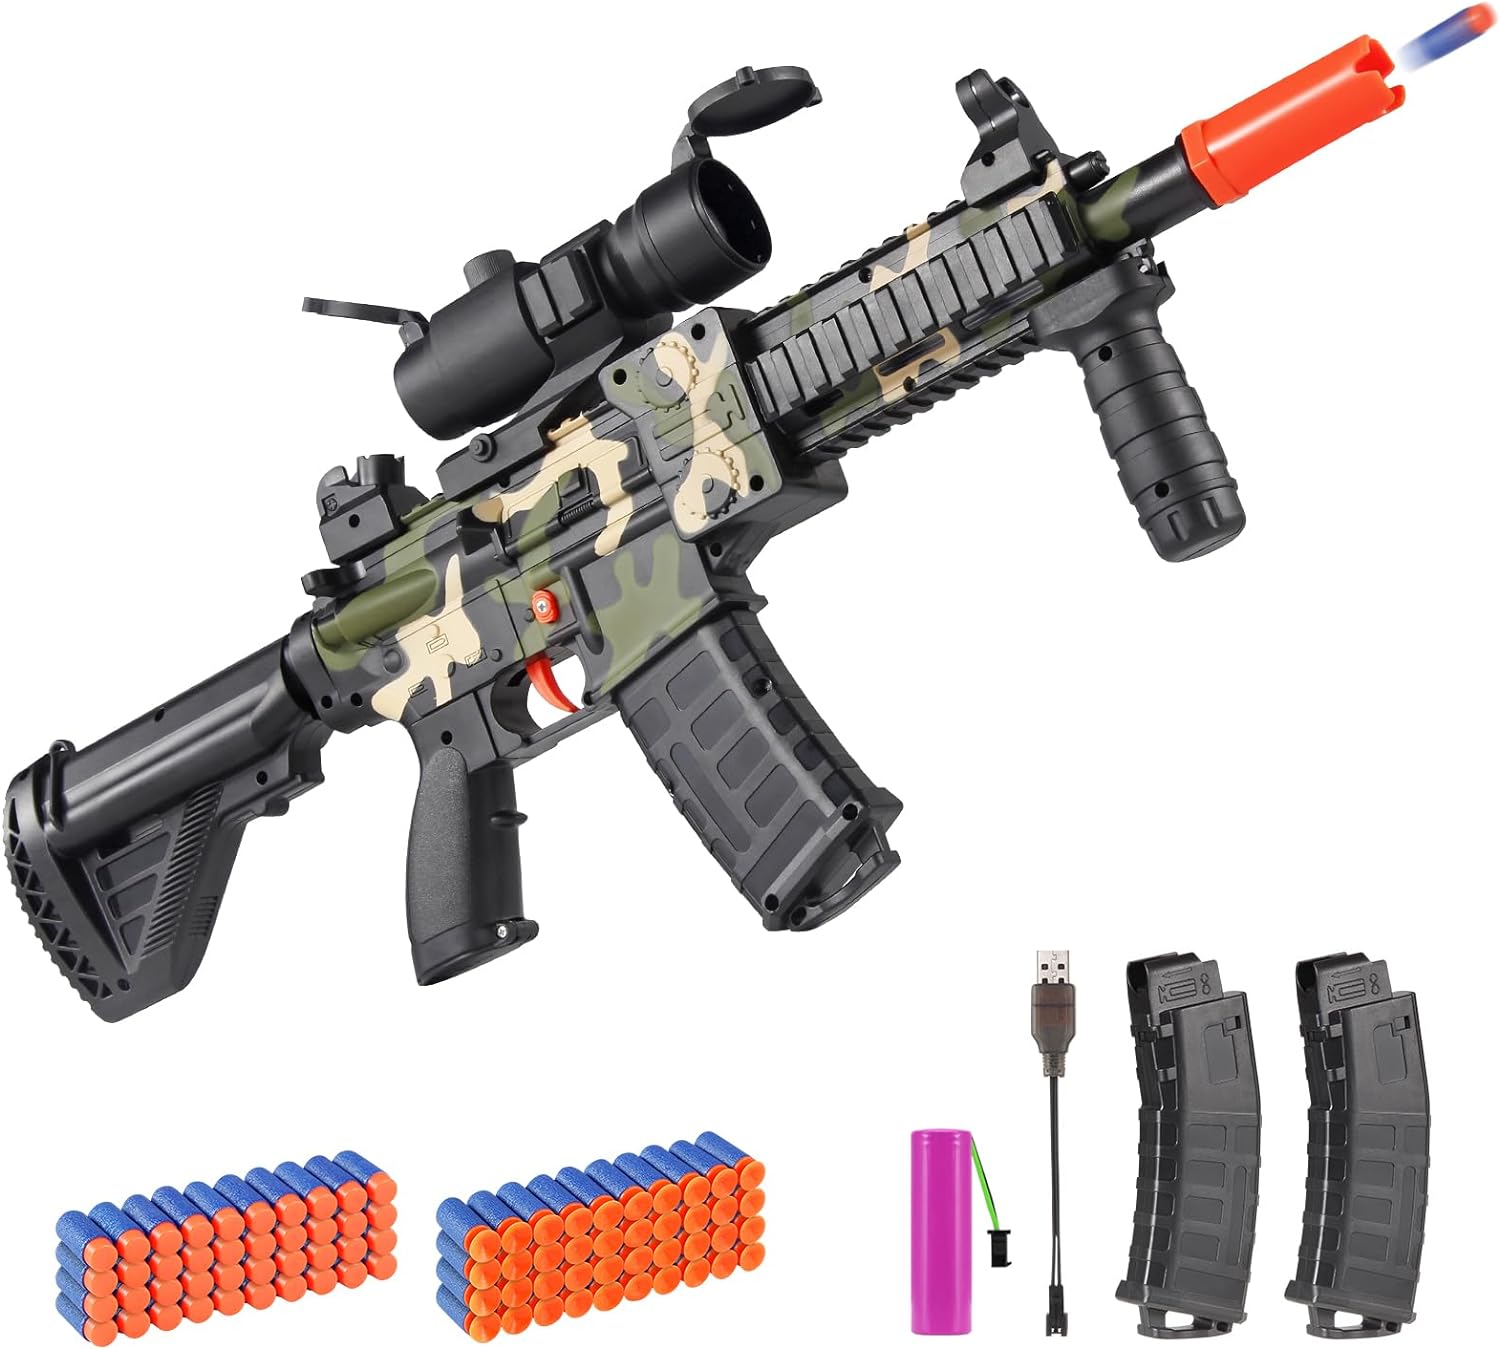 Nerf Sniper Rifle With Scope WholeSale - Price List, Bulk Buy at